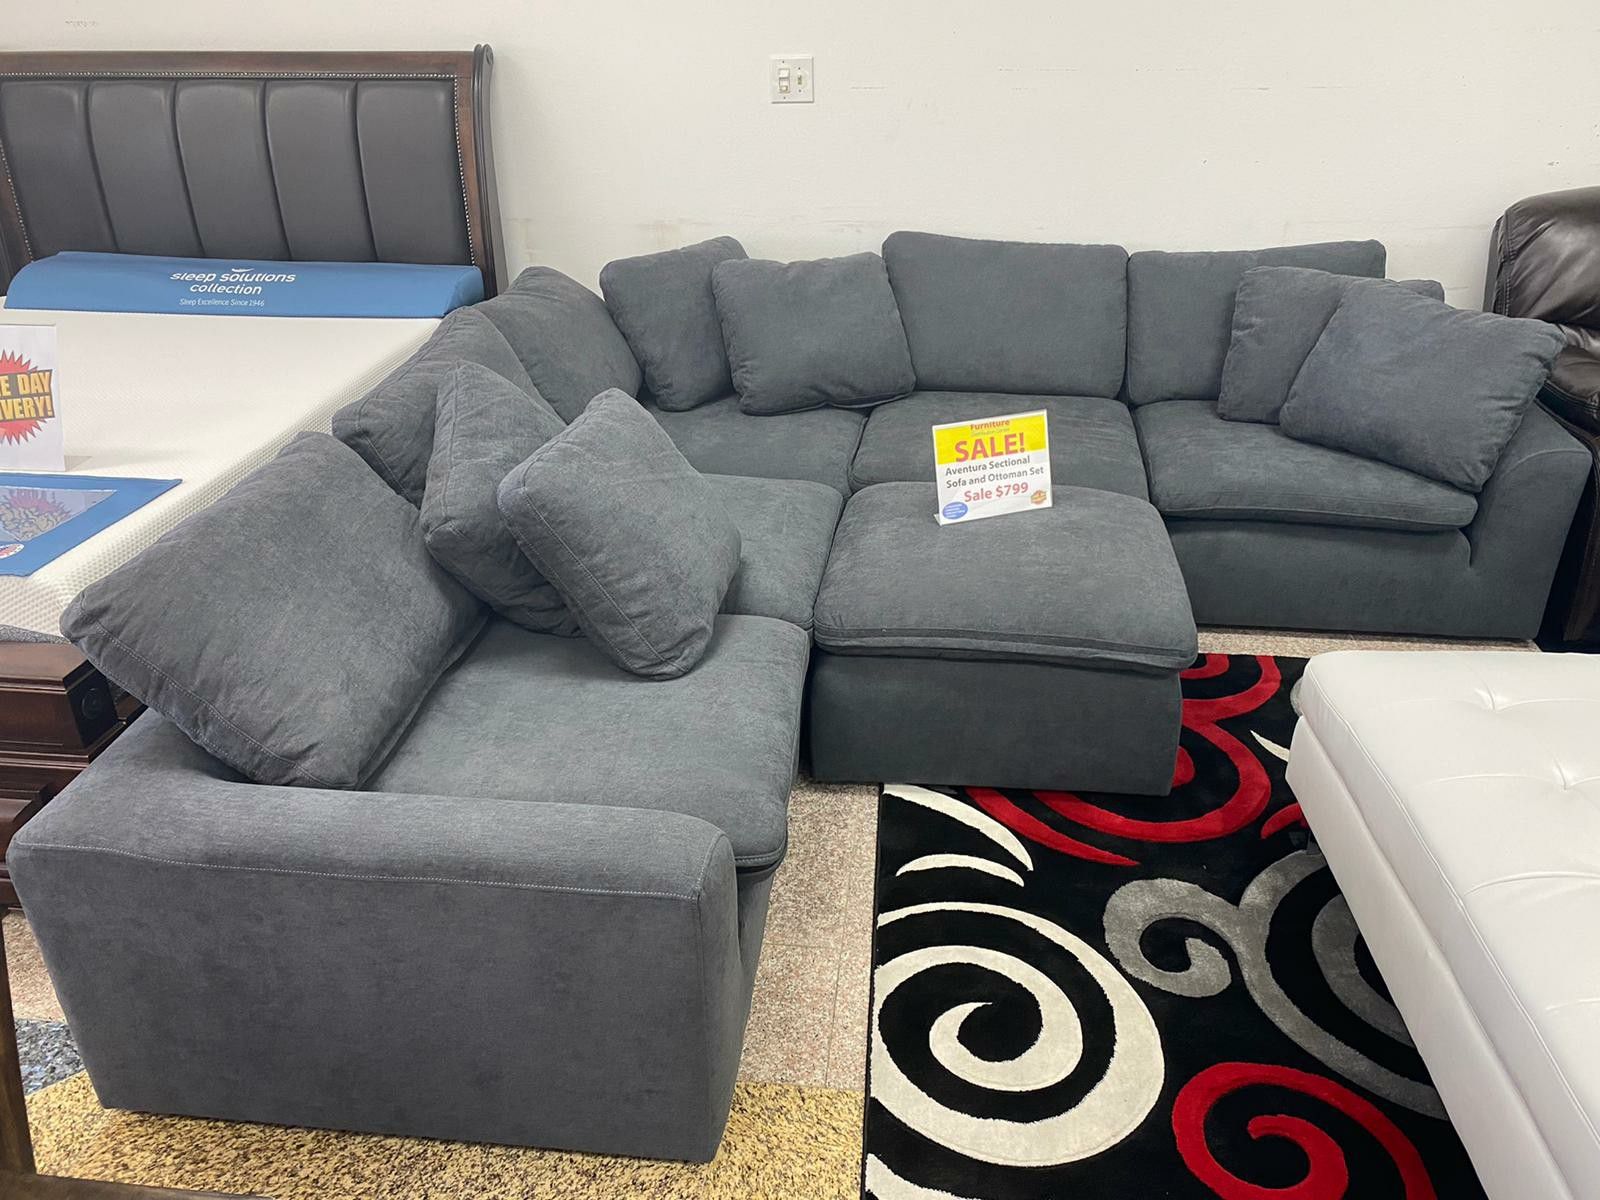 WE ARE OPEN! COMFY NEW AVENTURA SECTIONAL SOFA AND OTTOMAN SET ON SALE ONLY $699. SAME DAY DELIVERY!! FINANCING AVAILABLE!!